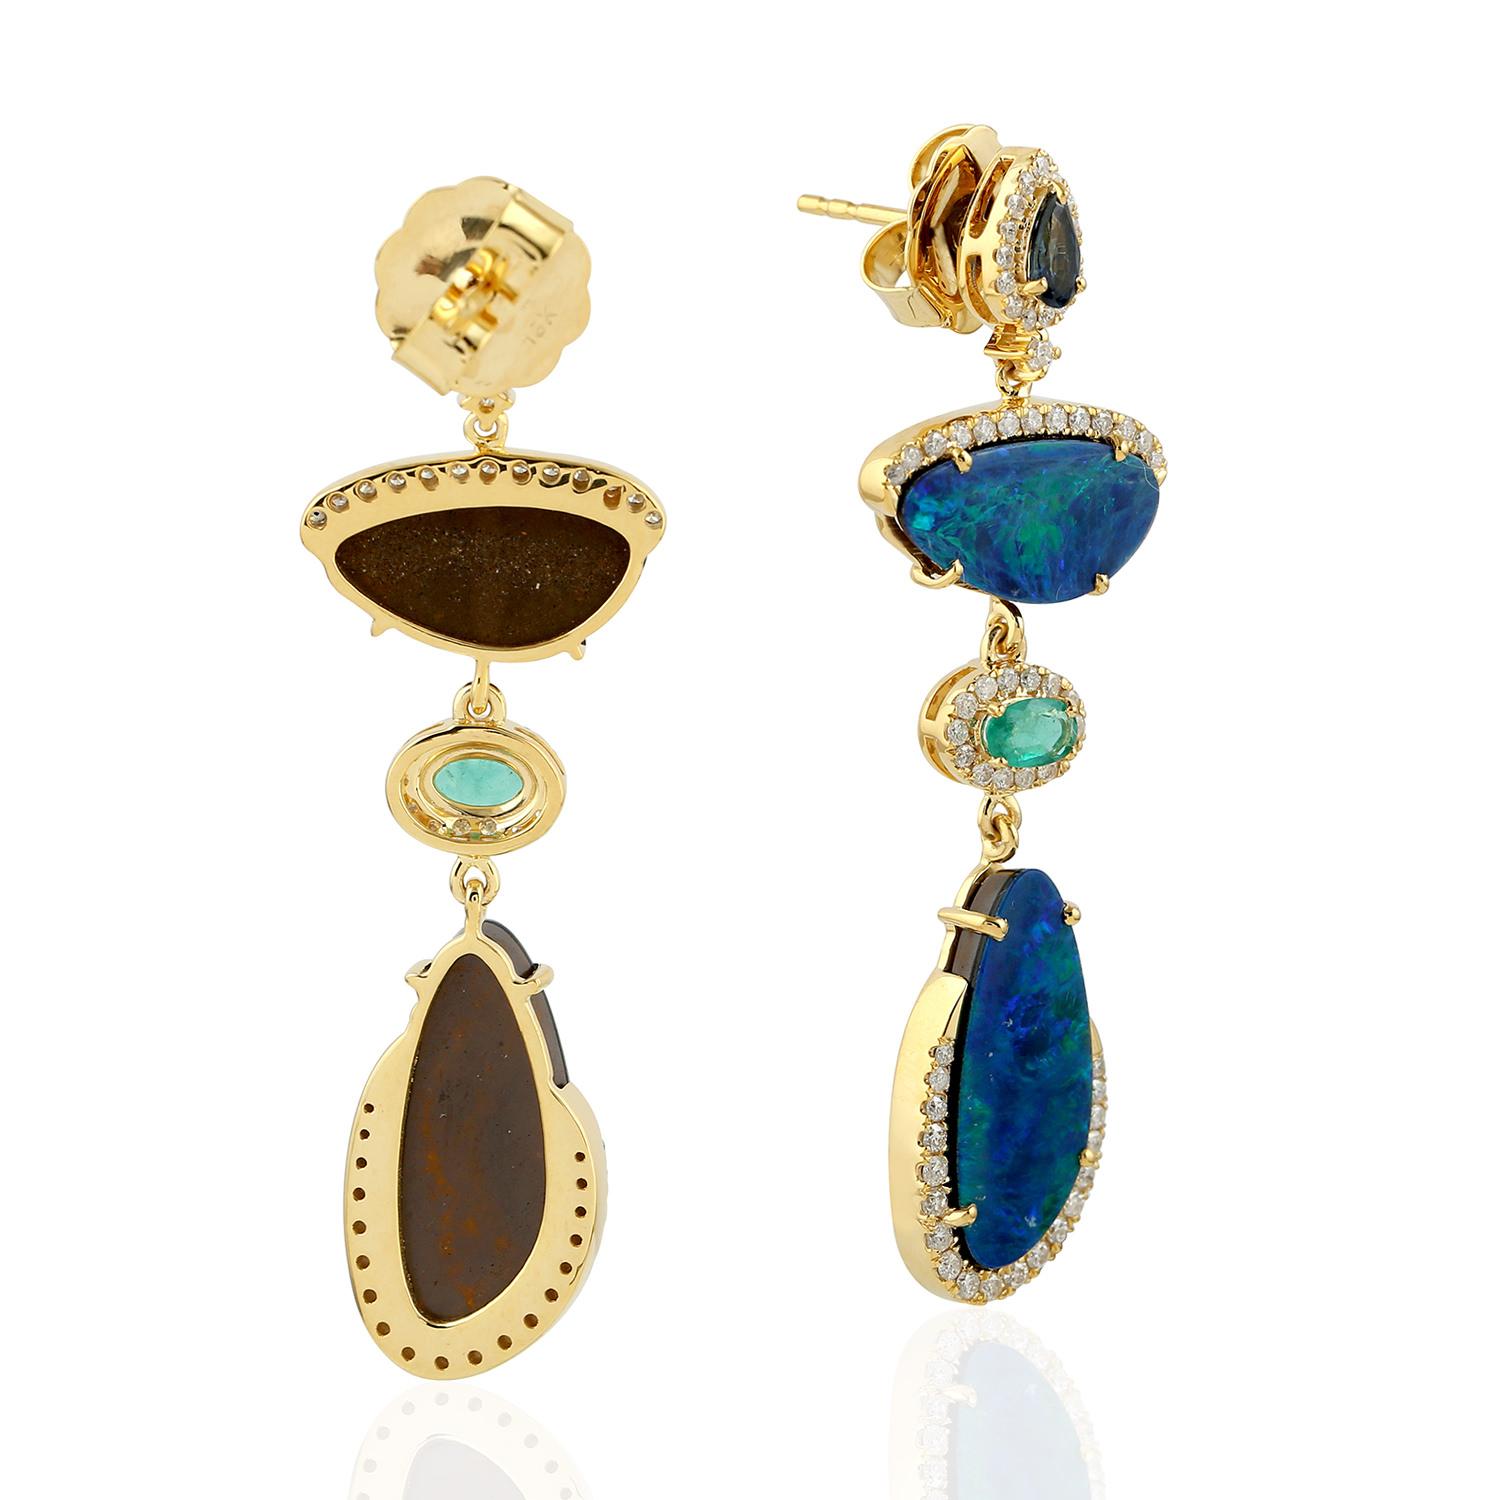 Simply gorgeous looking natural Opal Dangle Earring Diamond with Sapphire and Emerald in 18K Yellow Gold

Closure: Push Post

18KT Gold:8.758gms
Diamond:0.85cts
Emerald:0.53cts
Opal:10.82cts
Sapphire:0.72cts